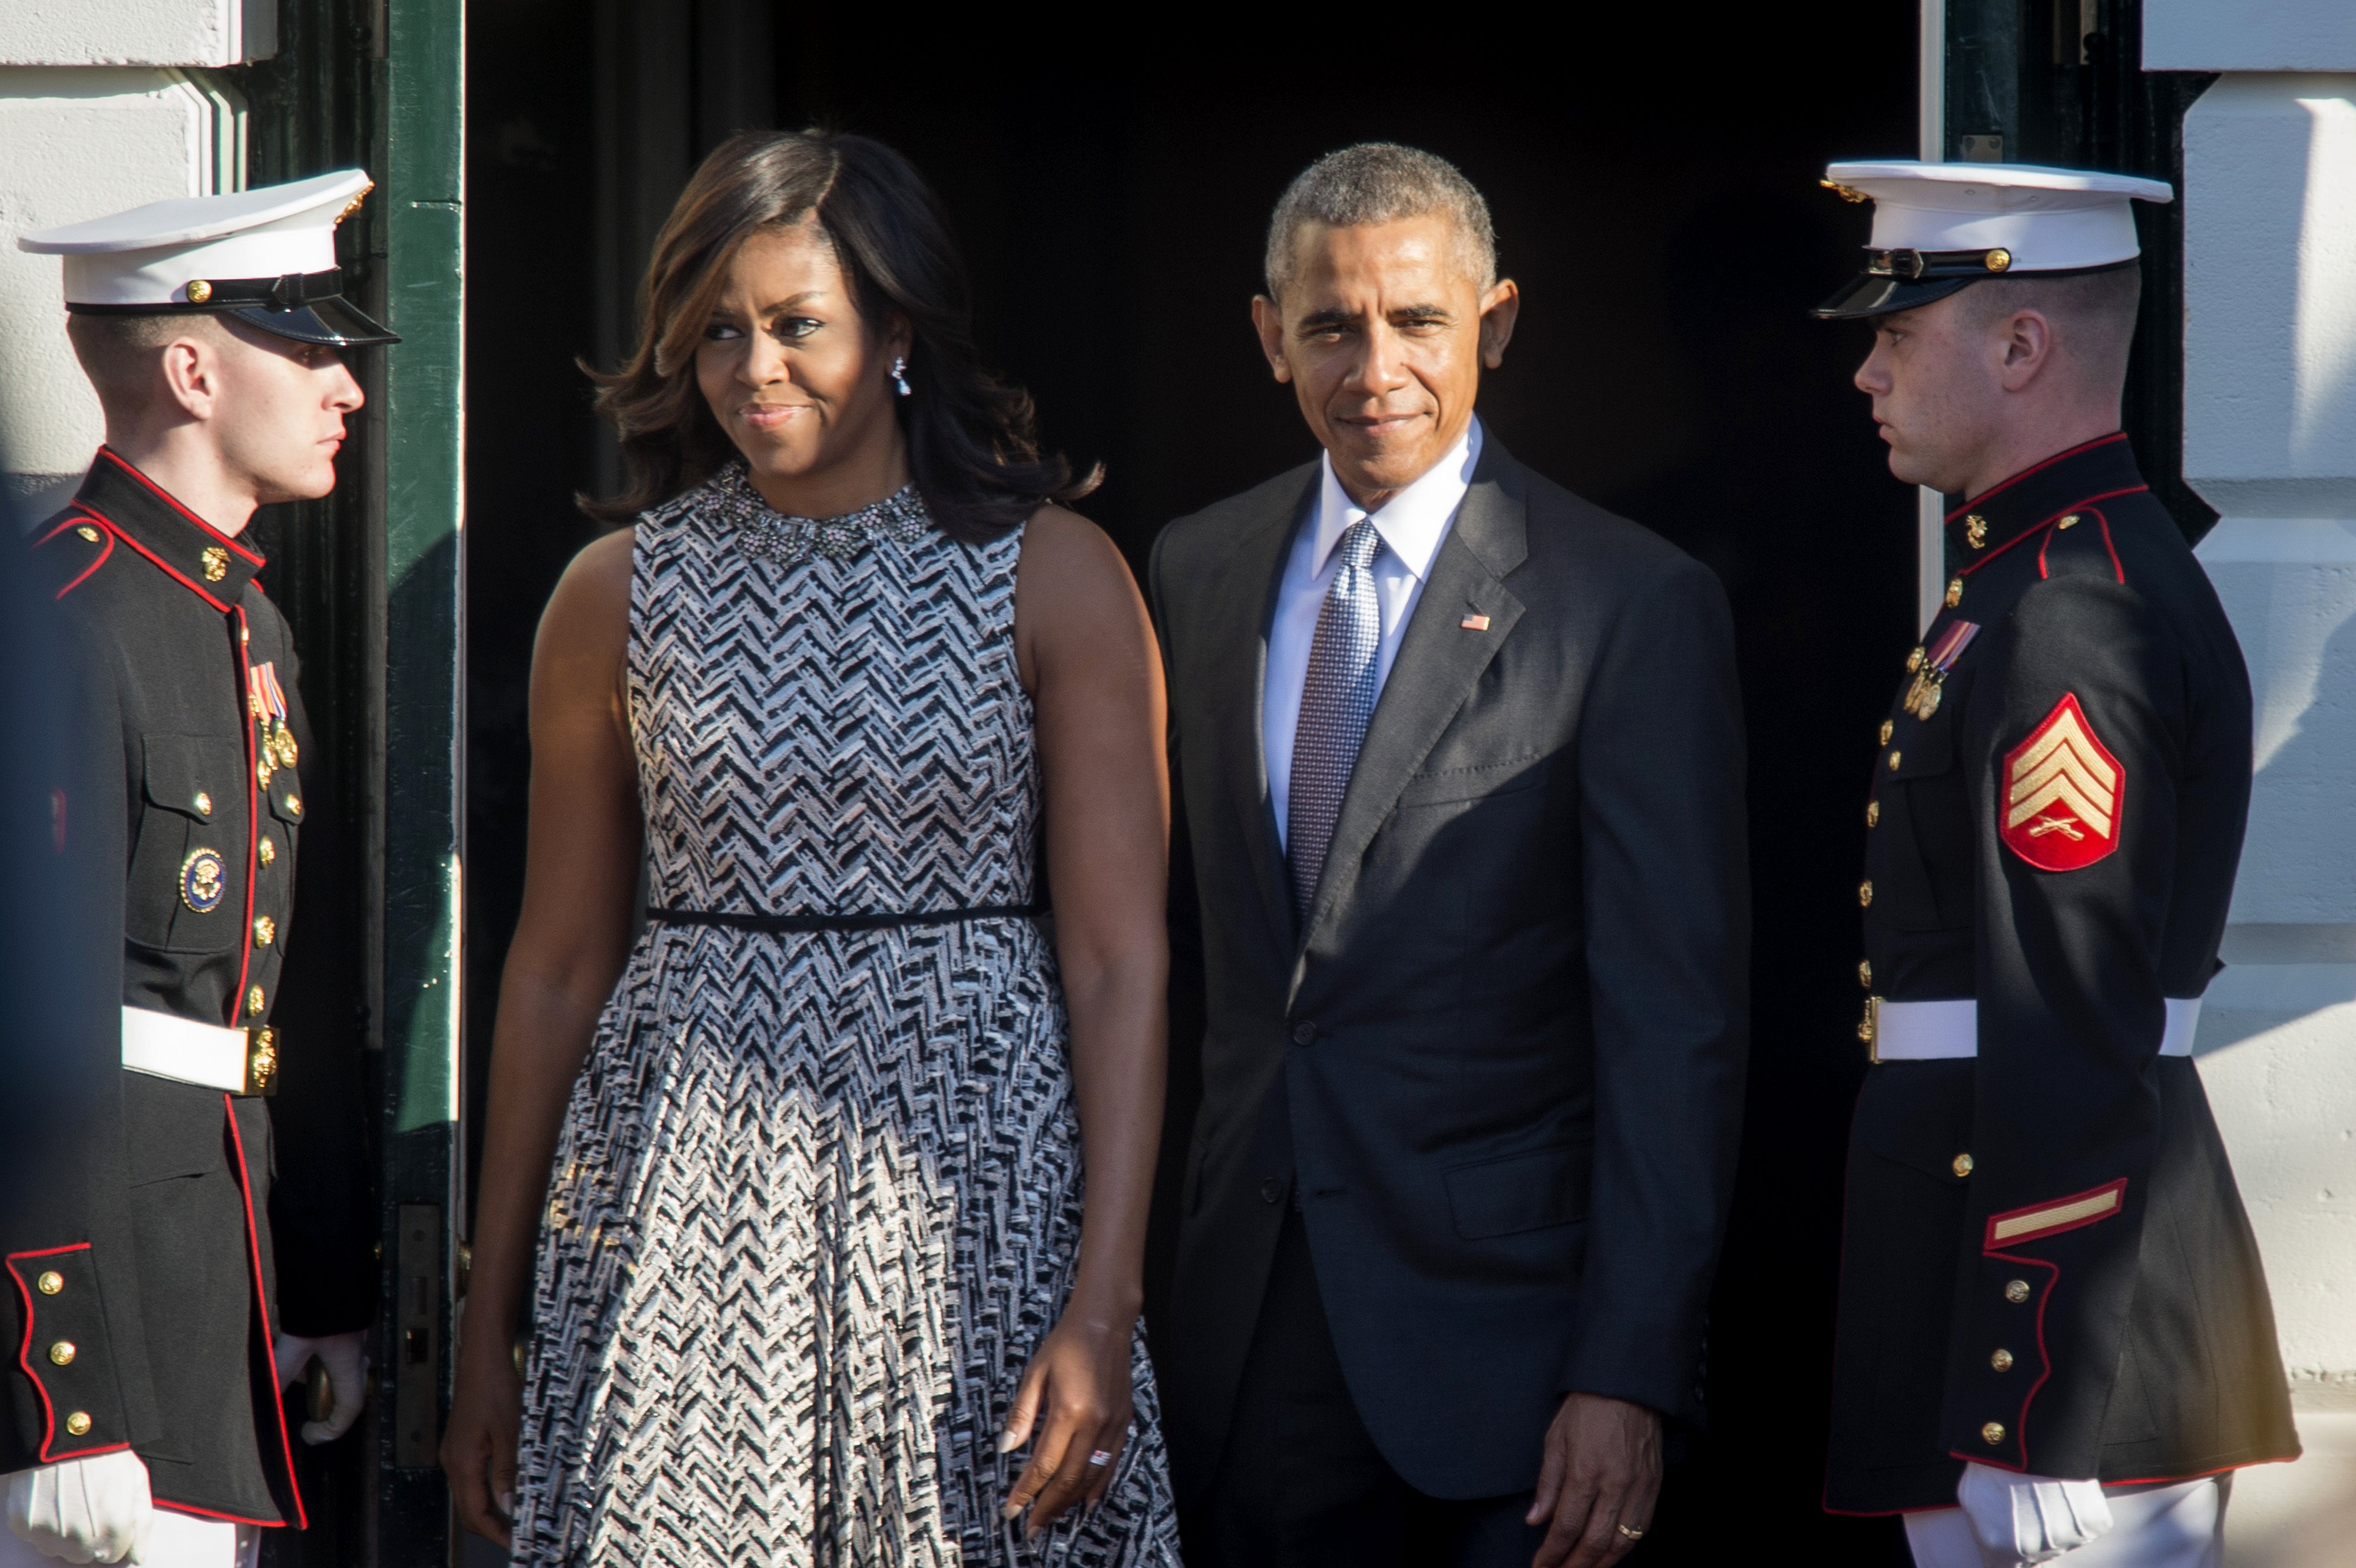 President Obama Just Wished FLOTUS Happy Birthday In The Sweetest Way Possible